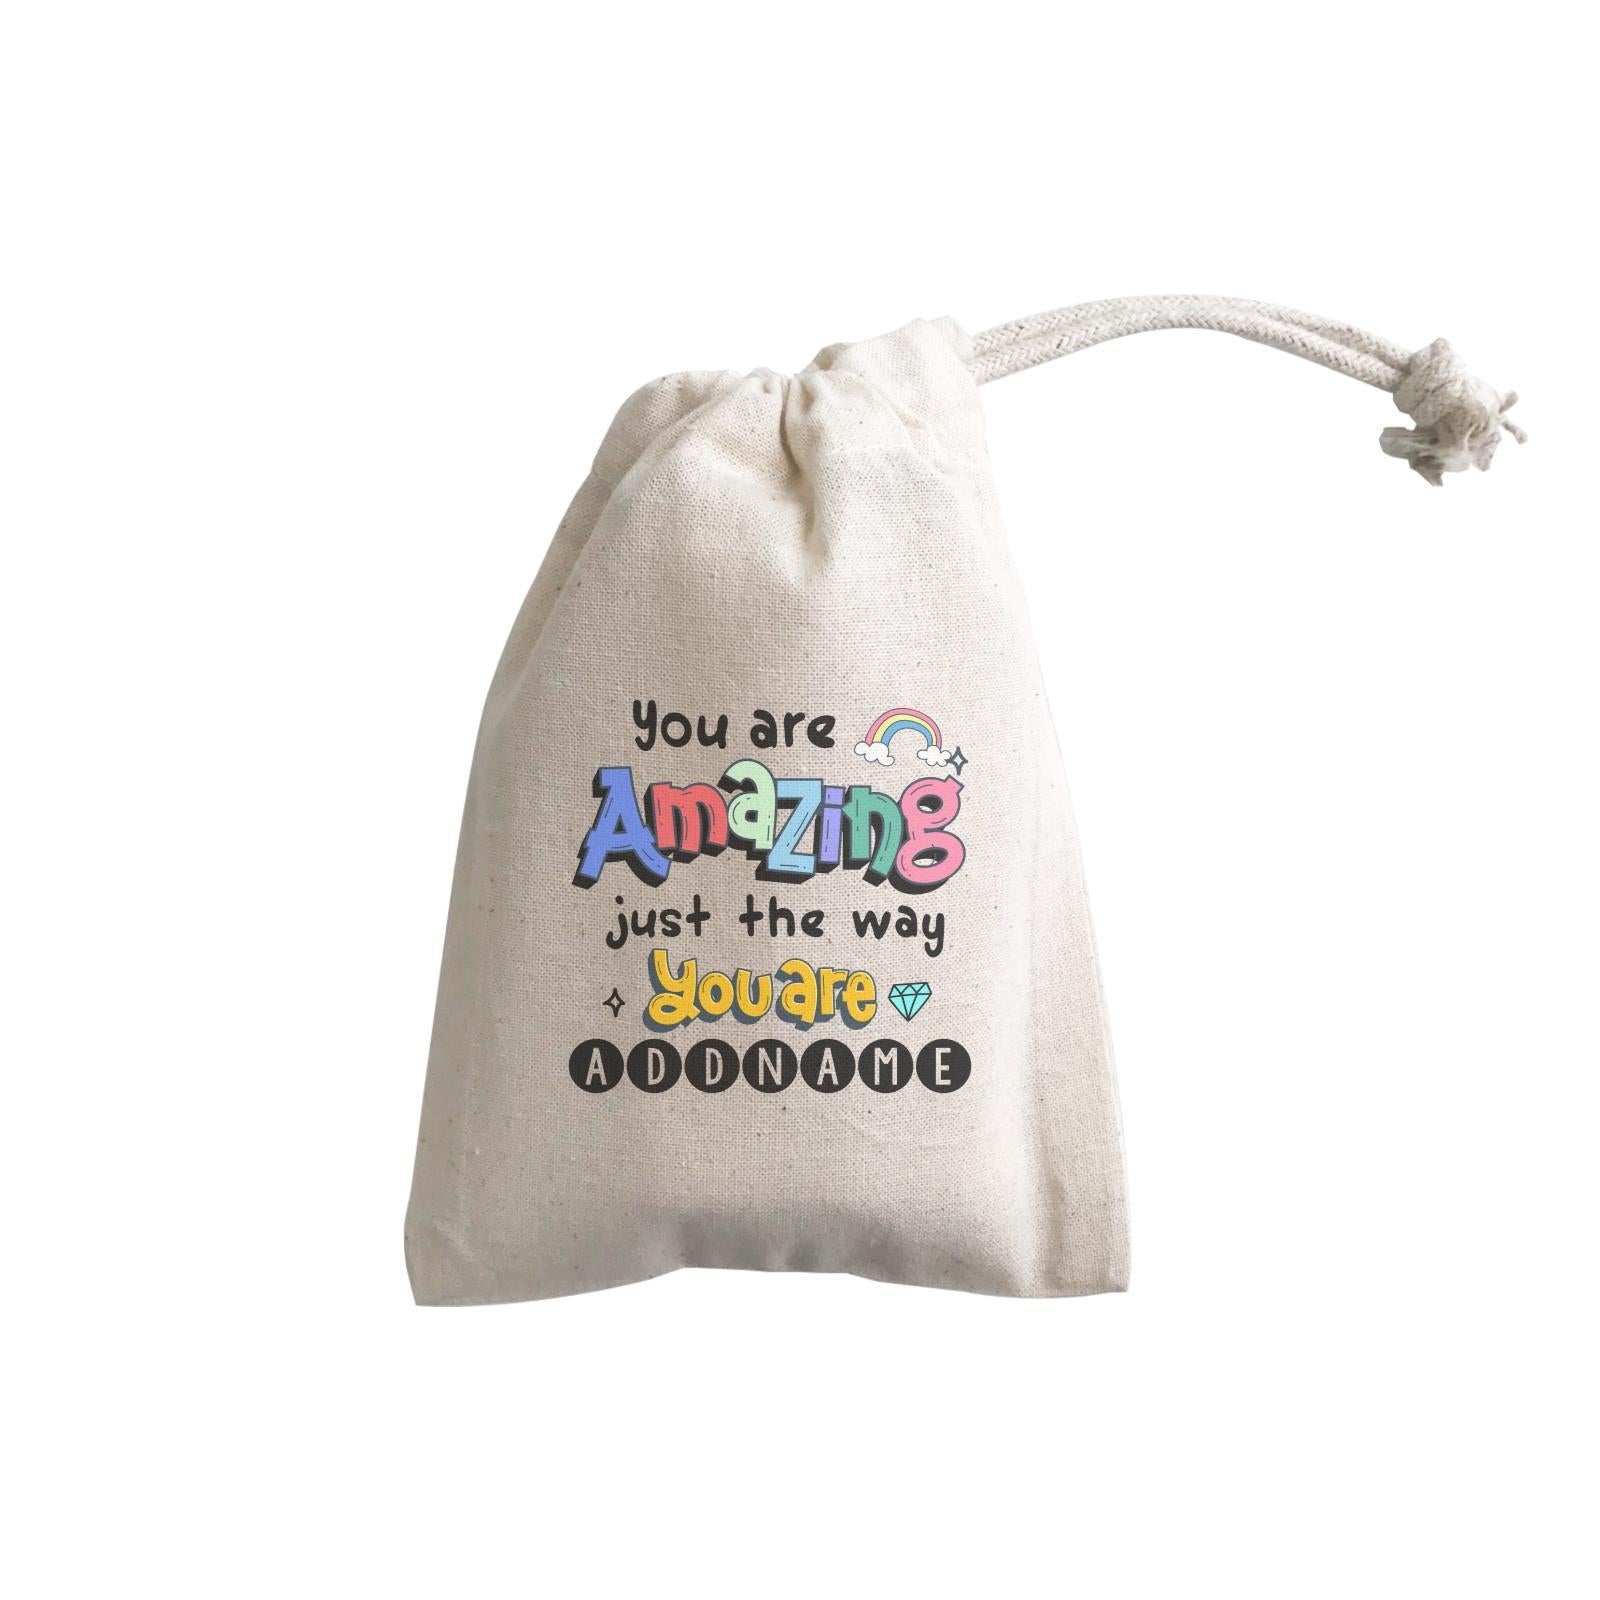 Children's Day Gift Series You Are Amazing Just The Way You Are Addname  Gift Pouch